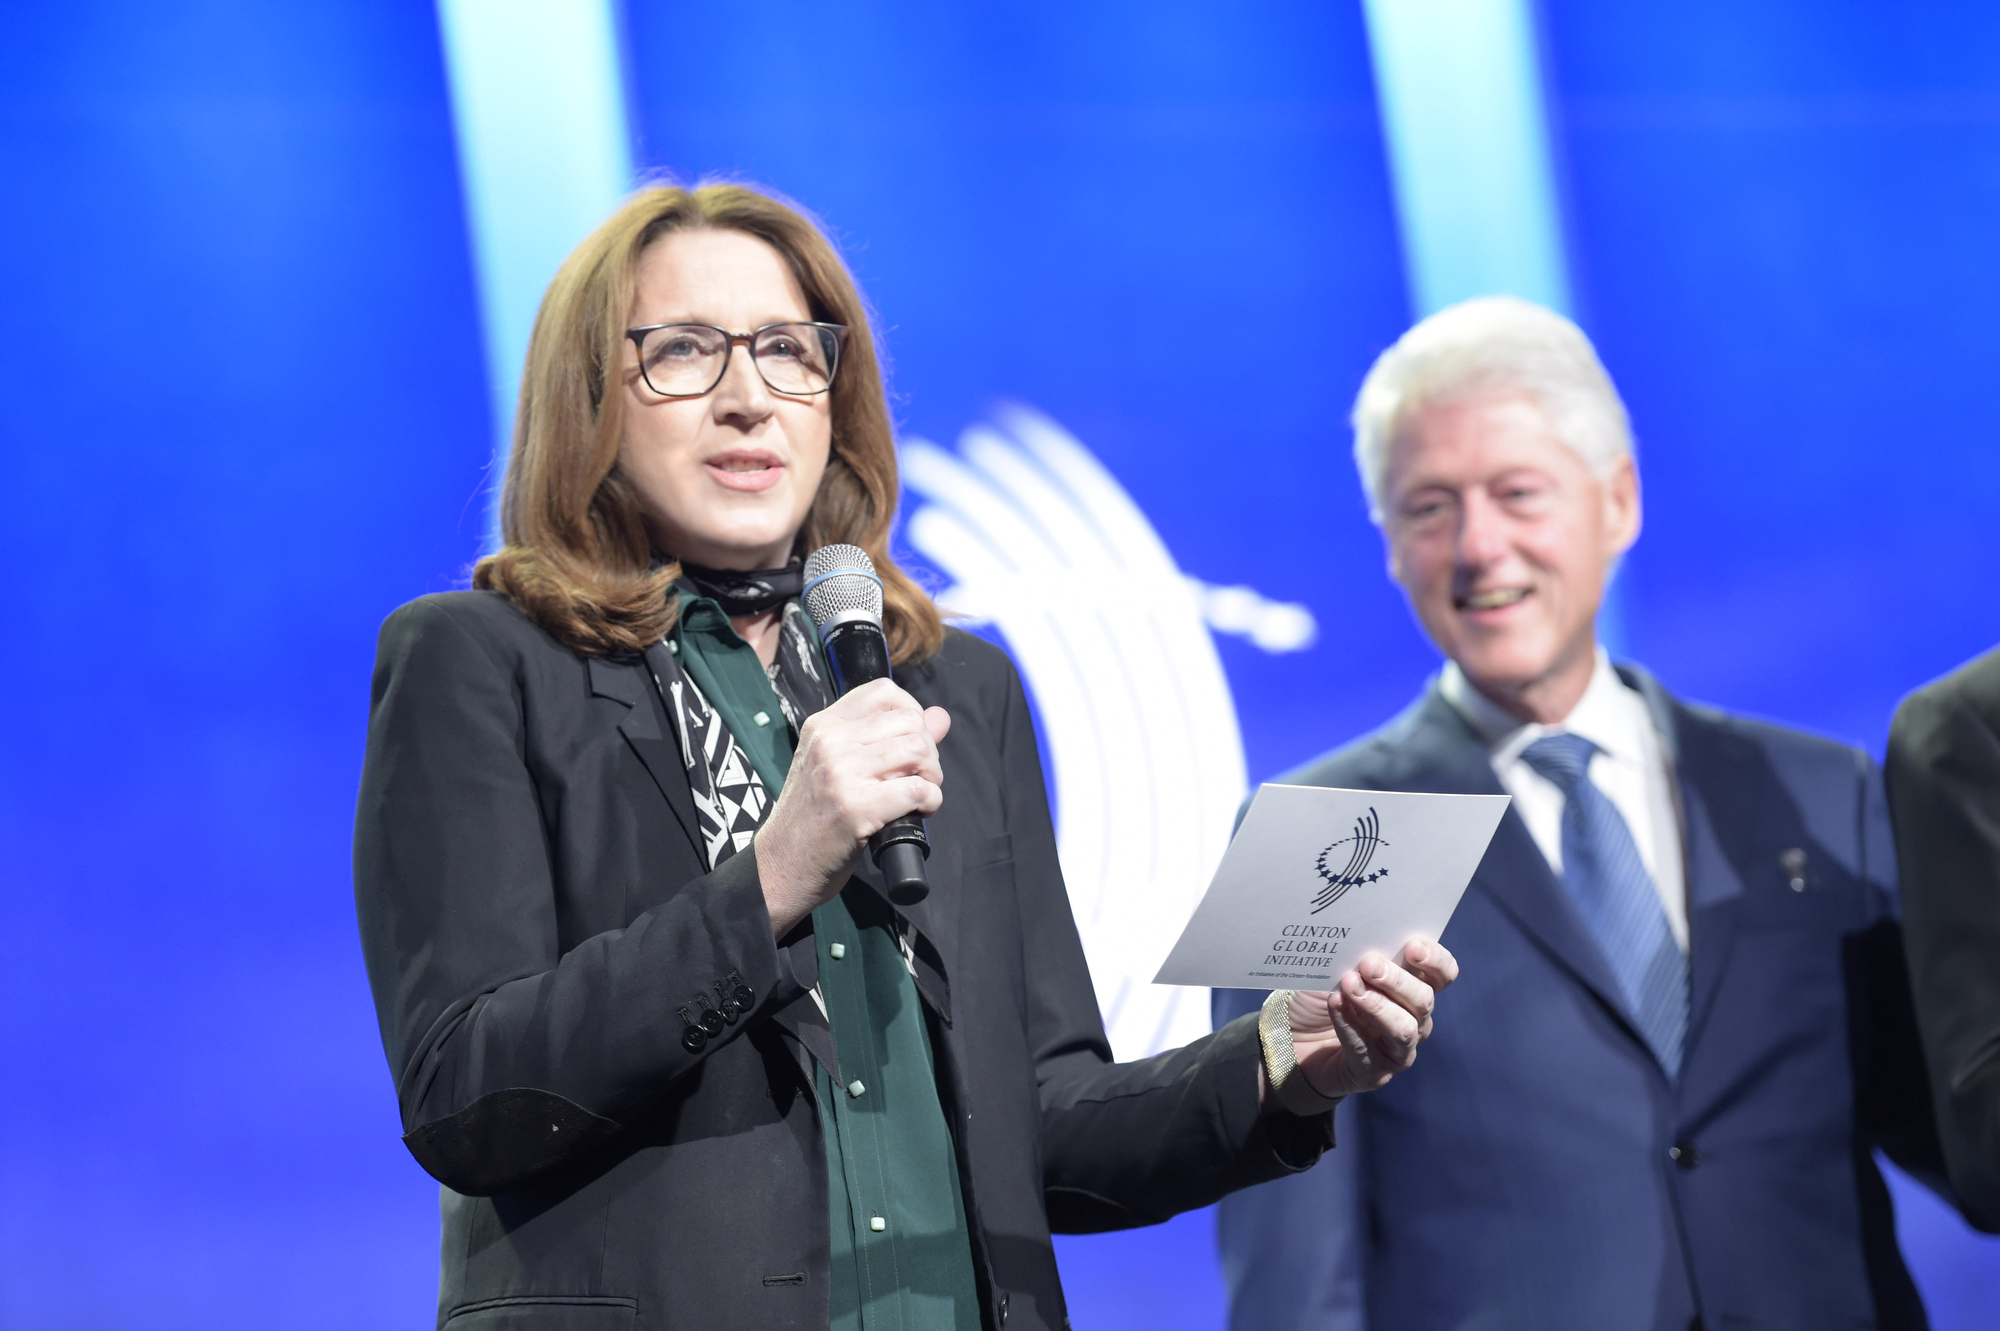 Catapult founder Maz Kessler with President Bill Clinton on stage at the Clinton Global Initiative 2015 Annual Meeting